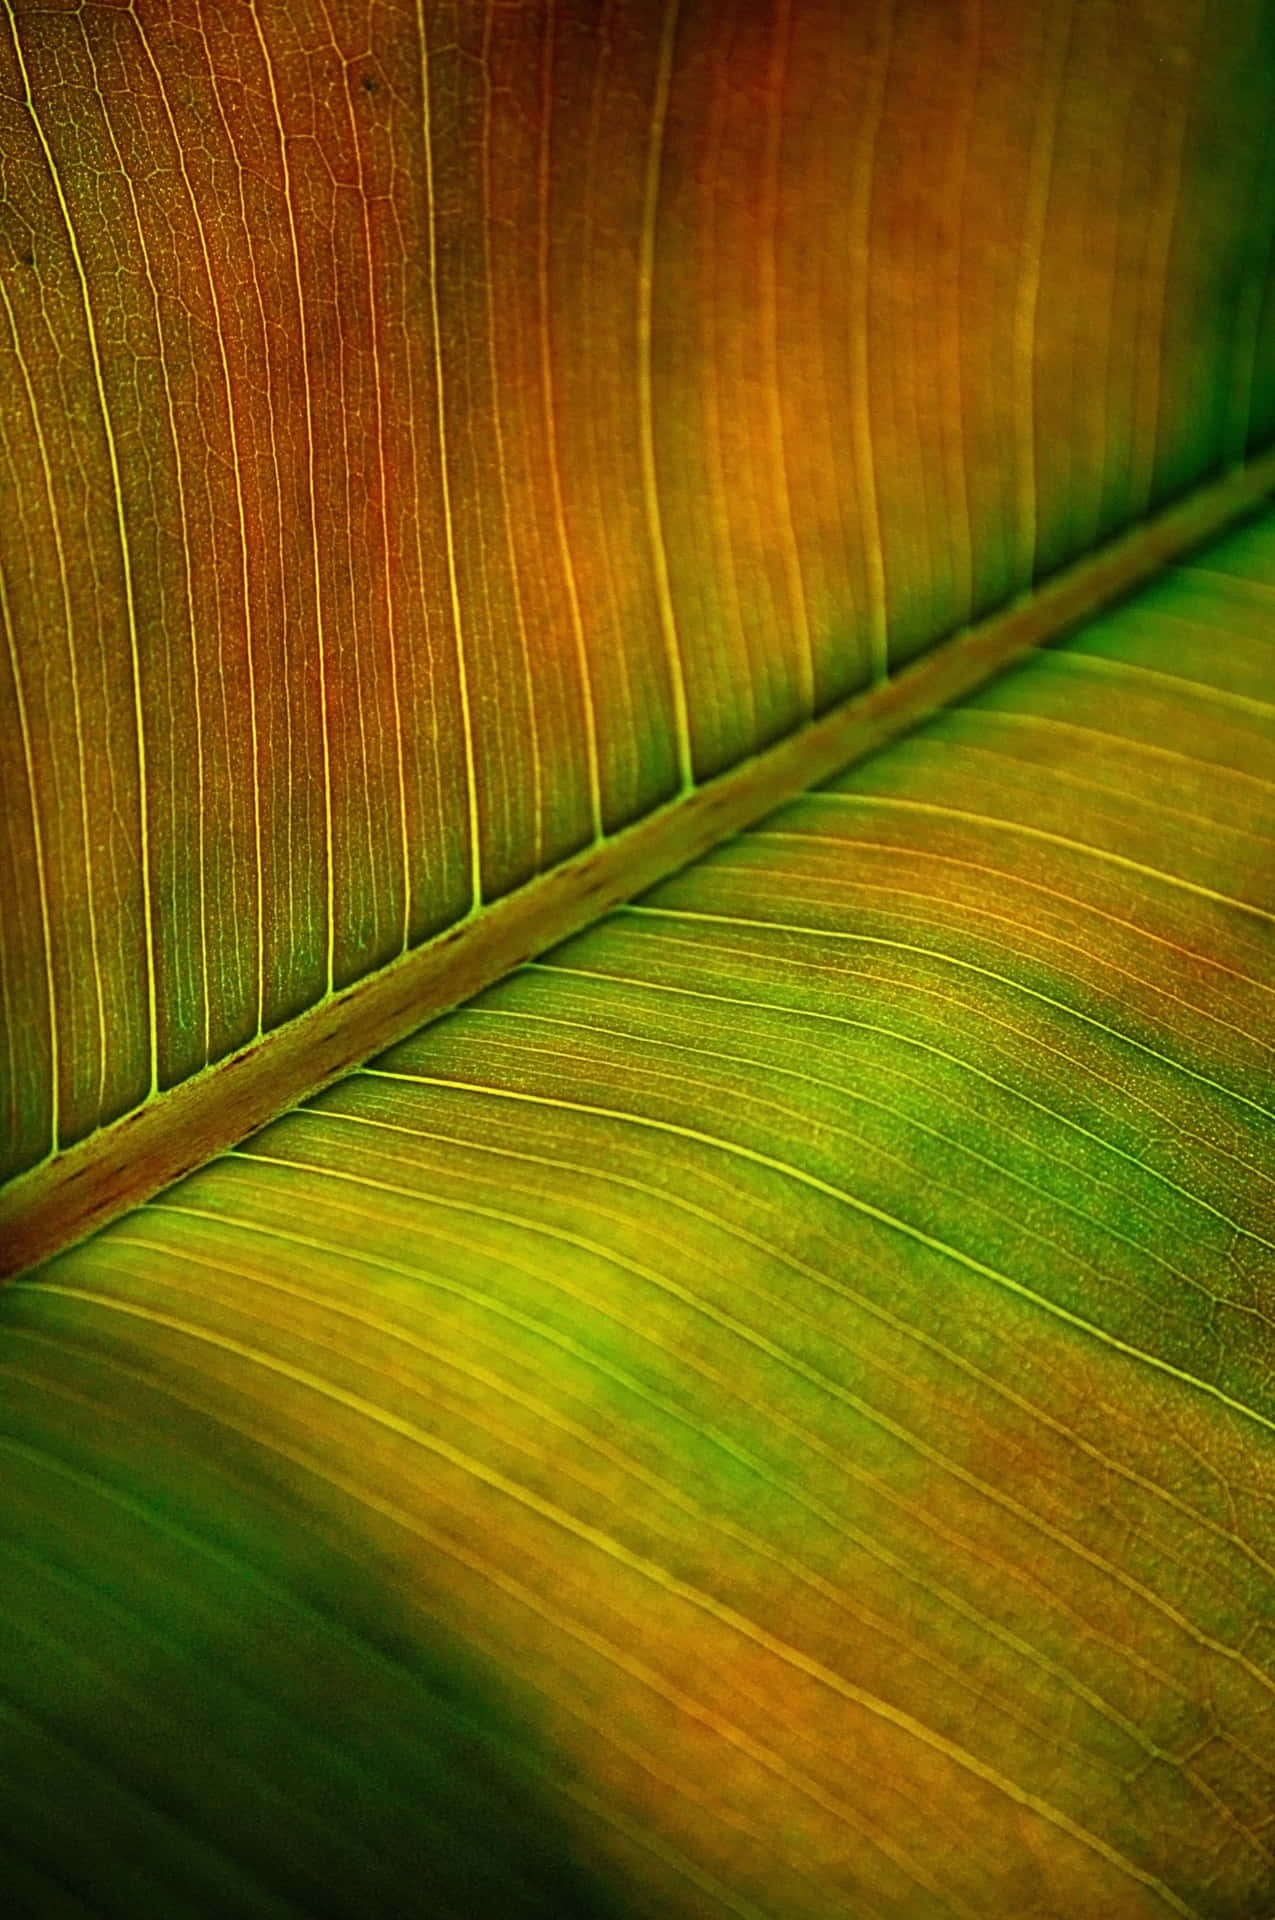 A classic banana leaf backdrop looks as timeless as ever.